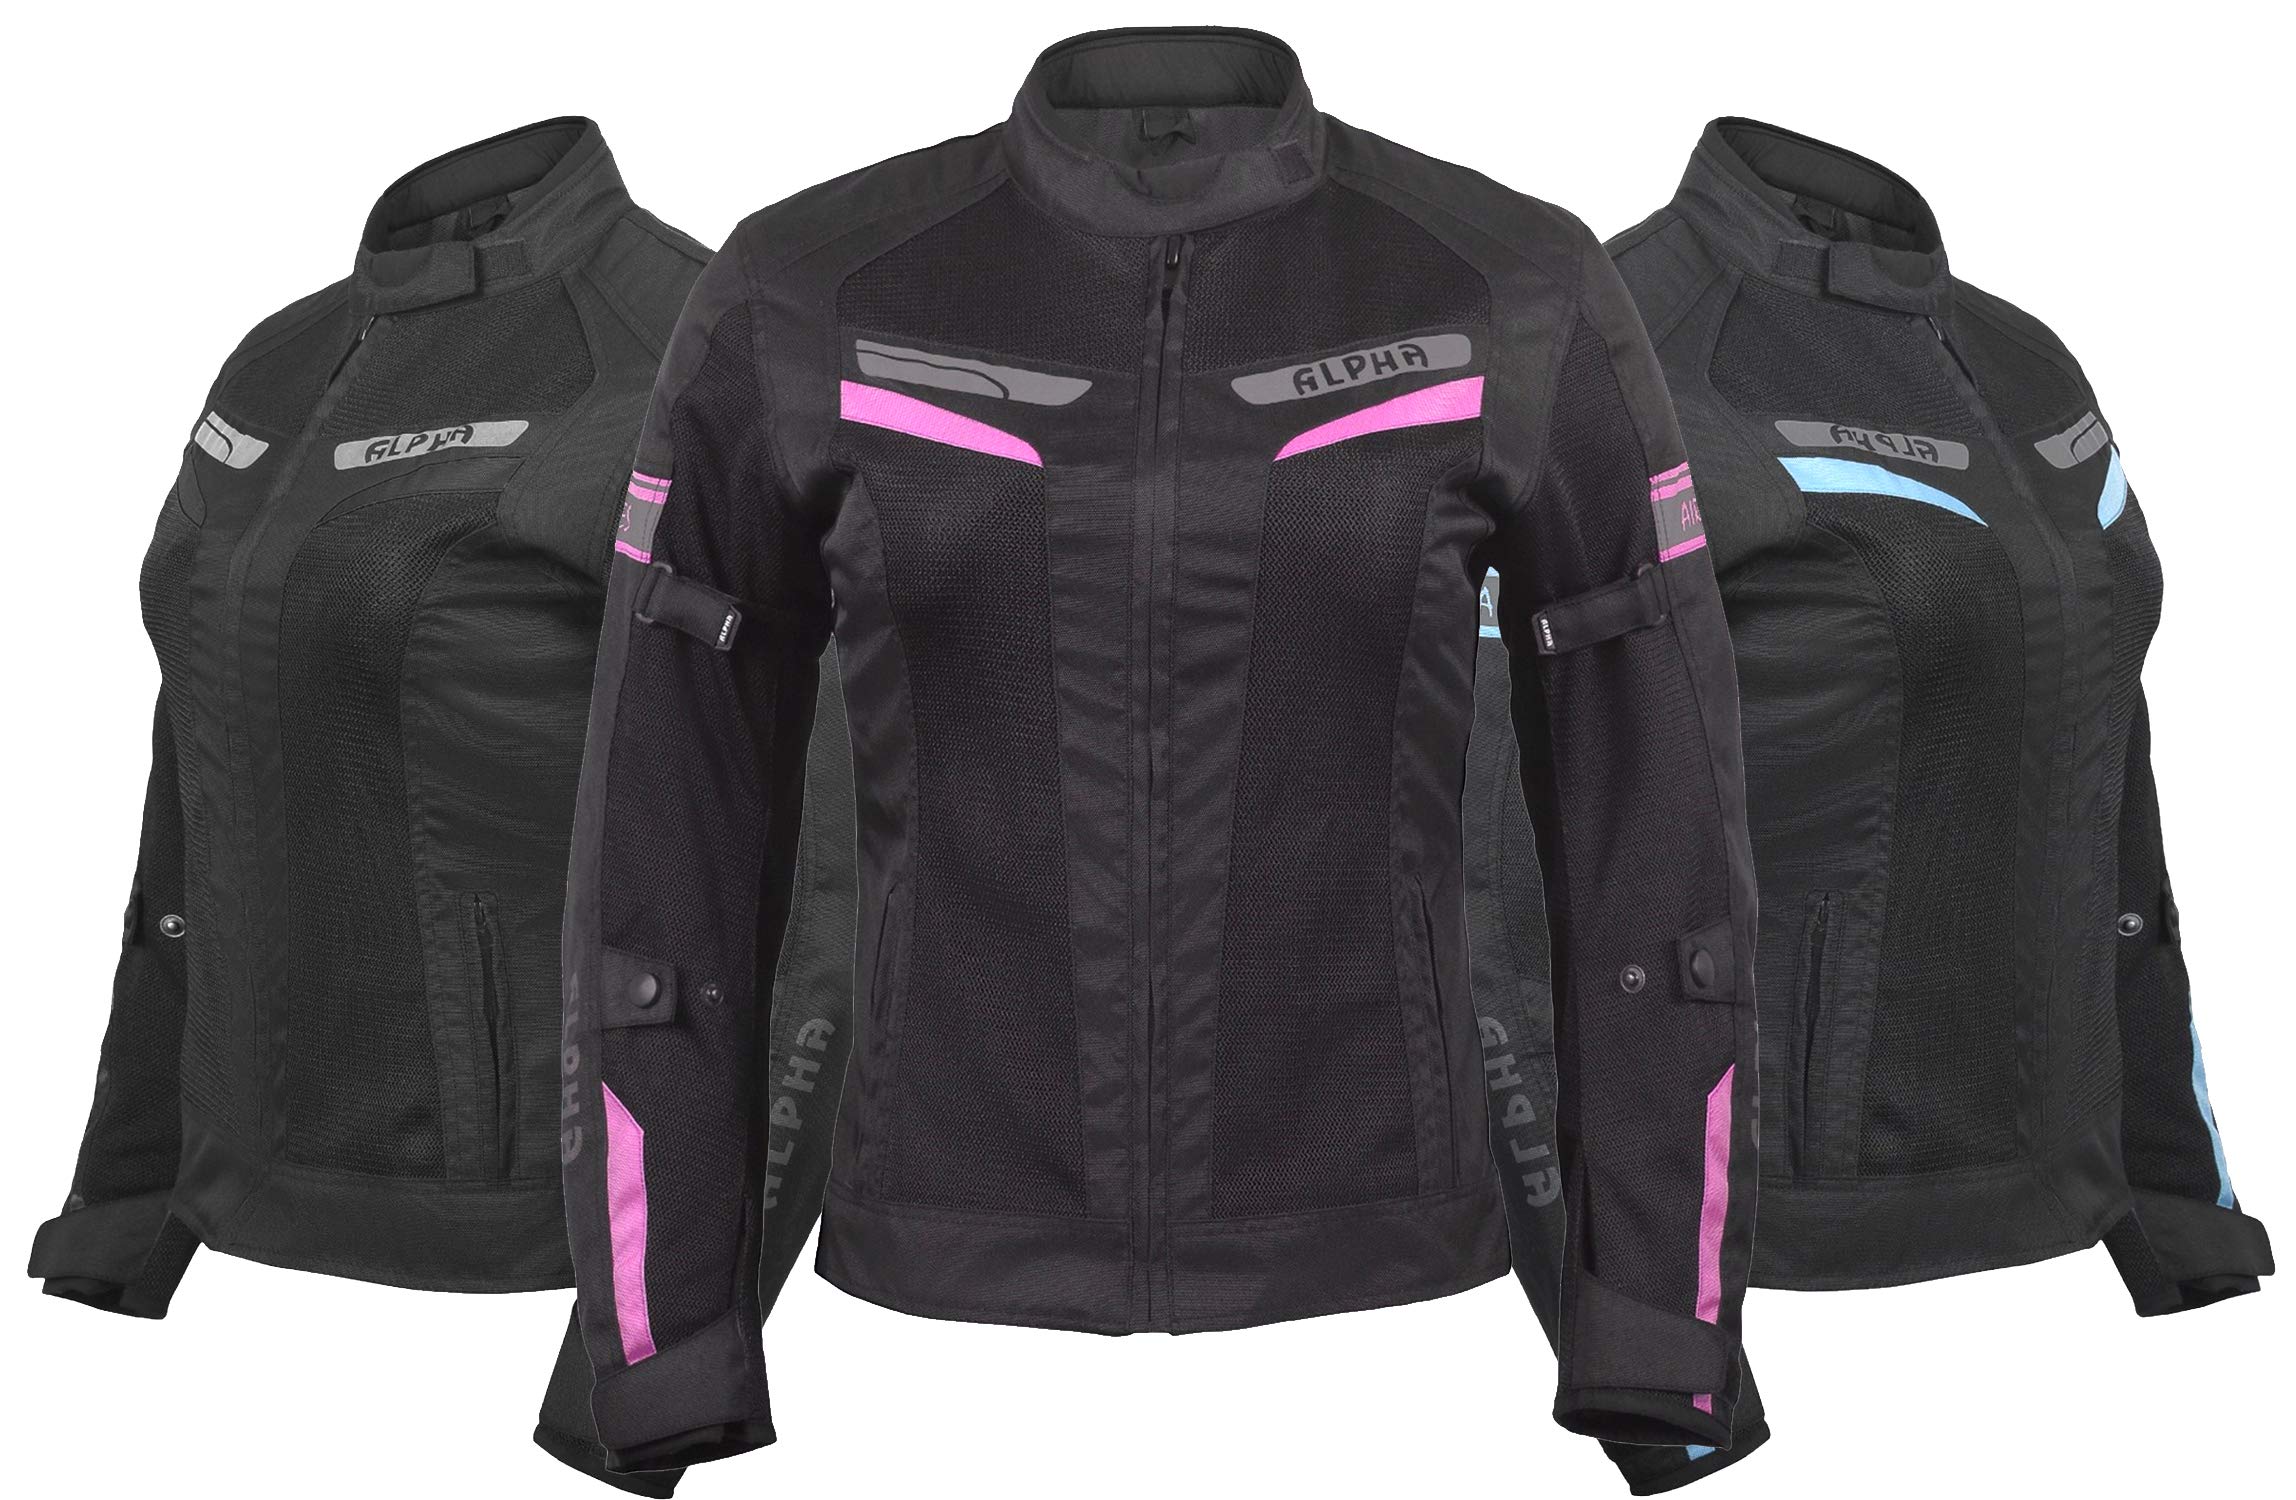 ALPHA CYCLE GEAR WOMEN'S MOTORCYCLE JACKET WOMEN RIDING MOTORBIKE CE ARMOURED ESCAPE (BLACK/PINK, X-LARGE)